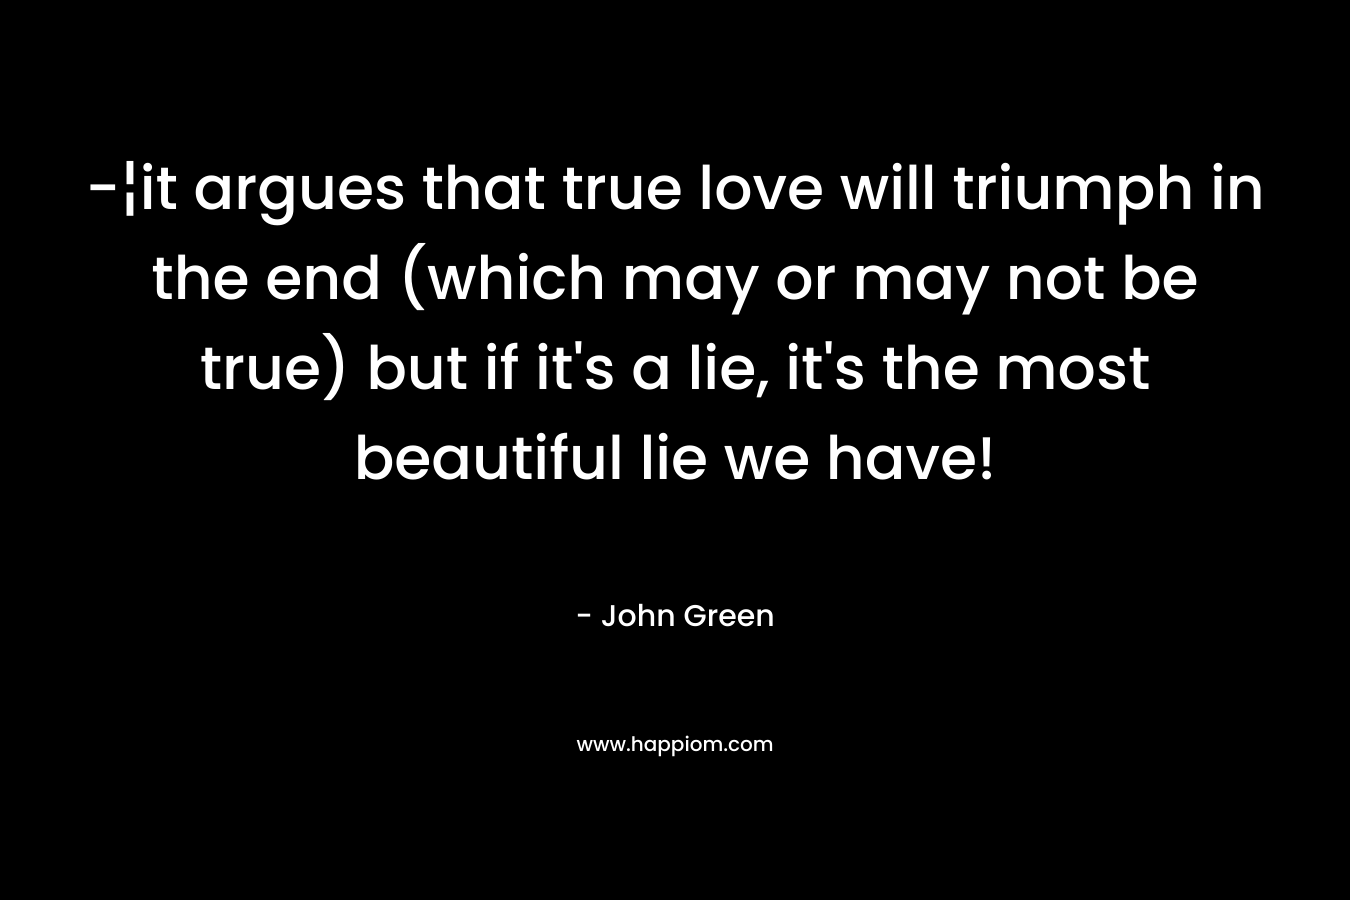 -¦it argues that true love will triumph in the end (which may or may not be true) but if it’s a lie, it’s the most beautiful lie we have! – John Green